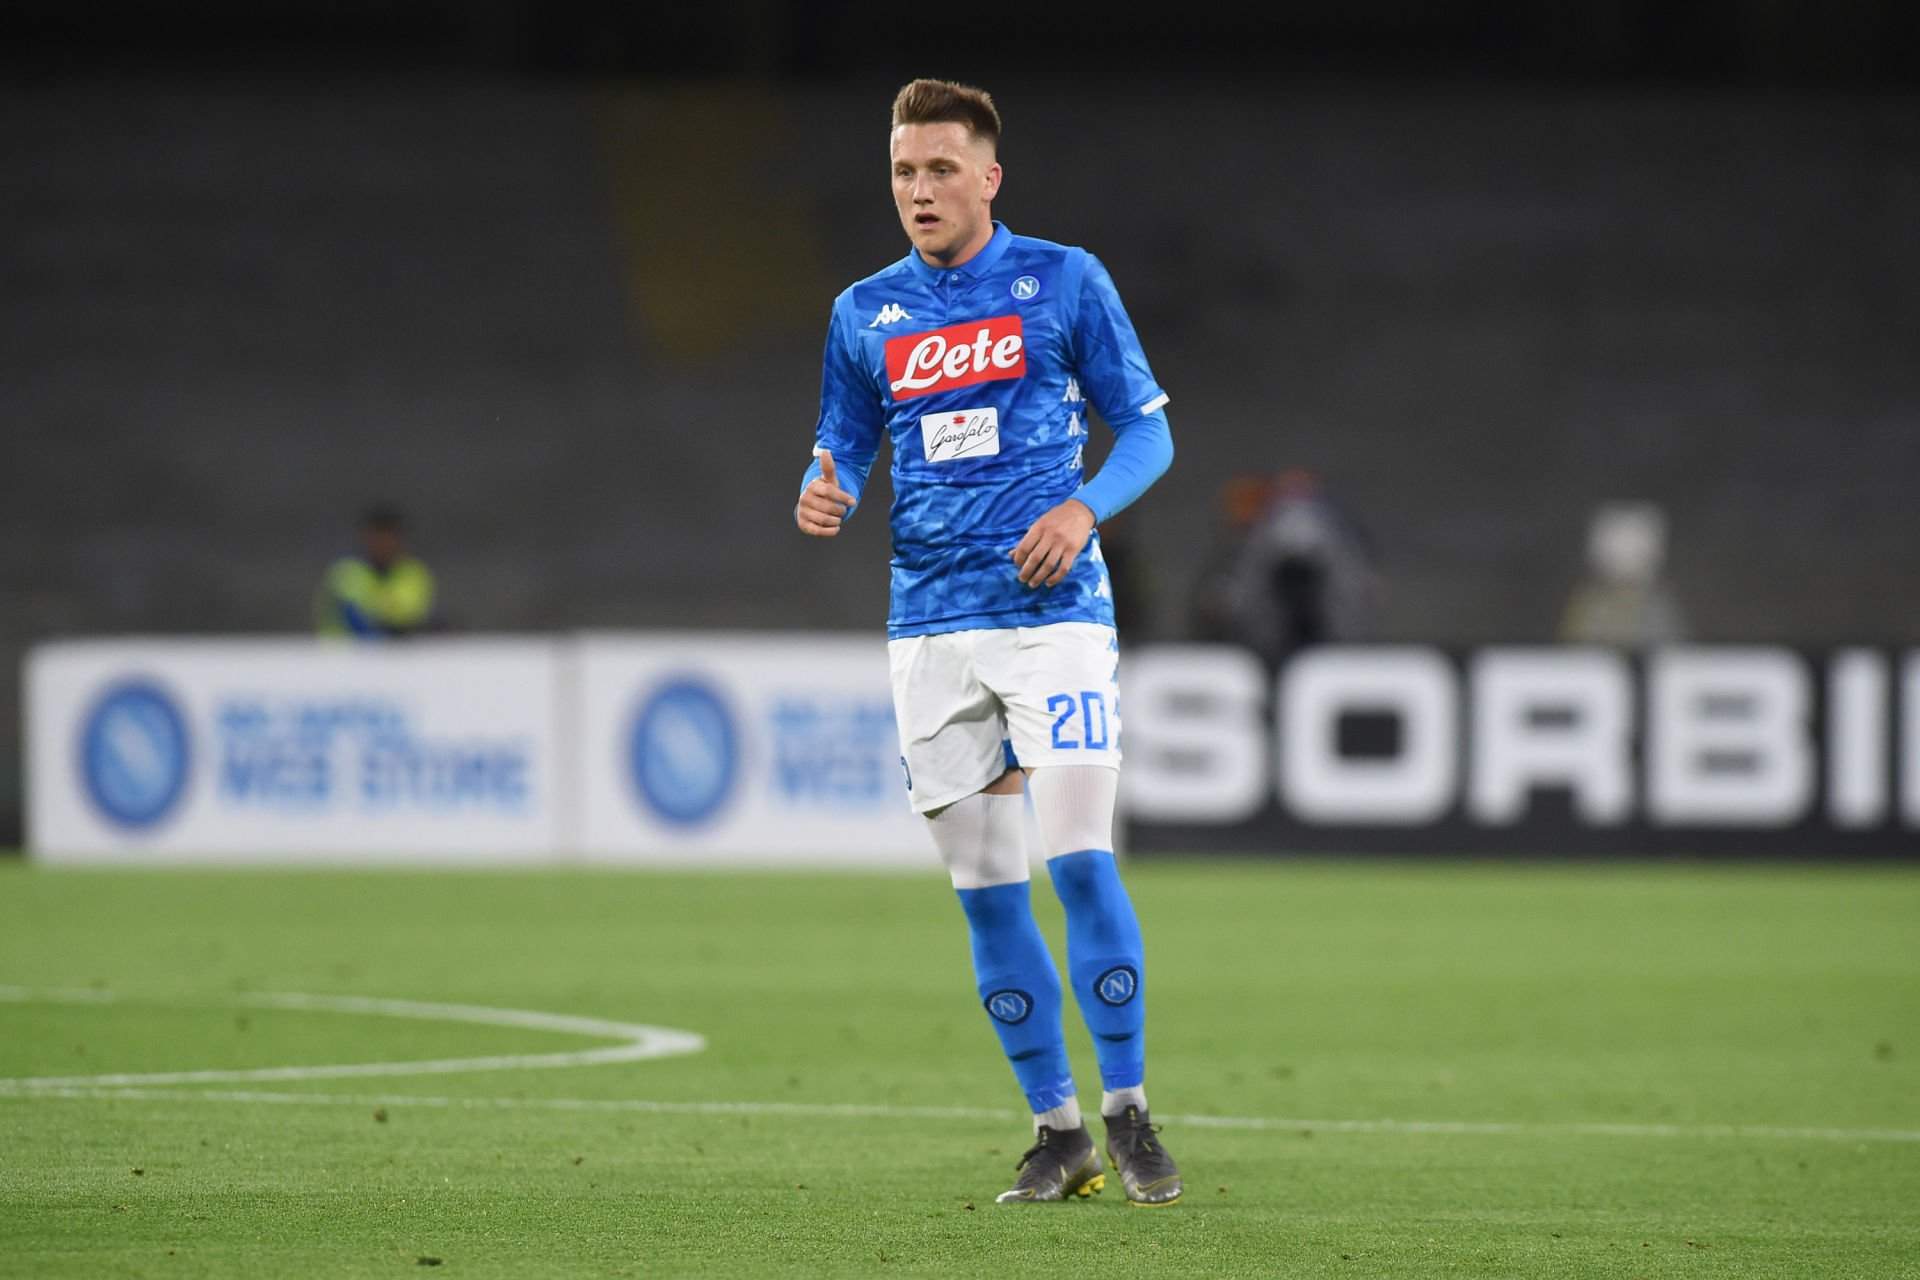 Piotr Zielinski of SSC Napoli during the Serie A TIM between SSC Napoli and Cagliari at Stadio San Paolo Naples Italy on 5 May 2019.(Photo Franco Romano) liga WLOSKA PILKA NOZNA SEZON 2018/2019 FOT.SPORTPHOTO24/NEWSPIX.PL ENGLAND OUT!!! --- Newspix.pl *** Local Caption *** www.newspix.pl mail us: info@newspix.pl call us: 0048 022 23 22 222 --- Polish Picture Agency by Ringier Axel Springer Poland